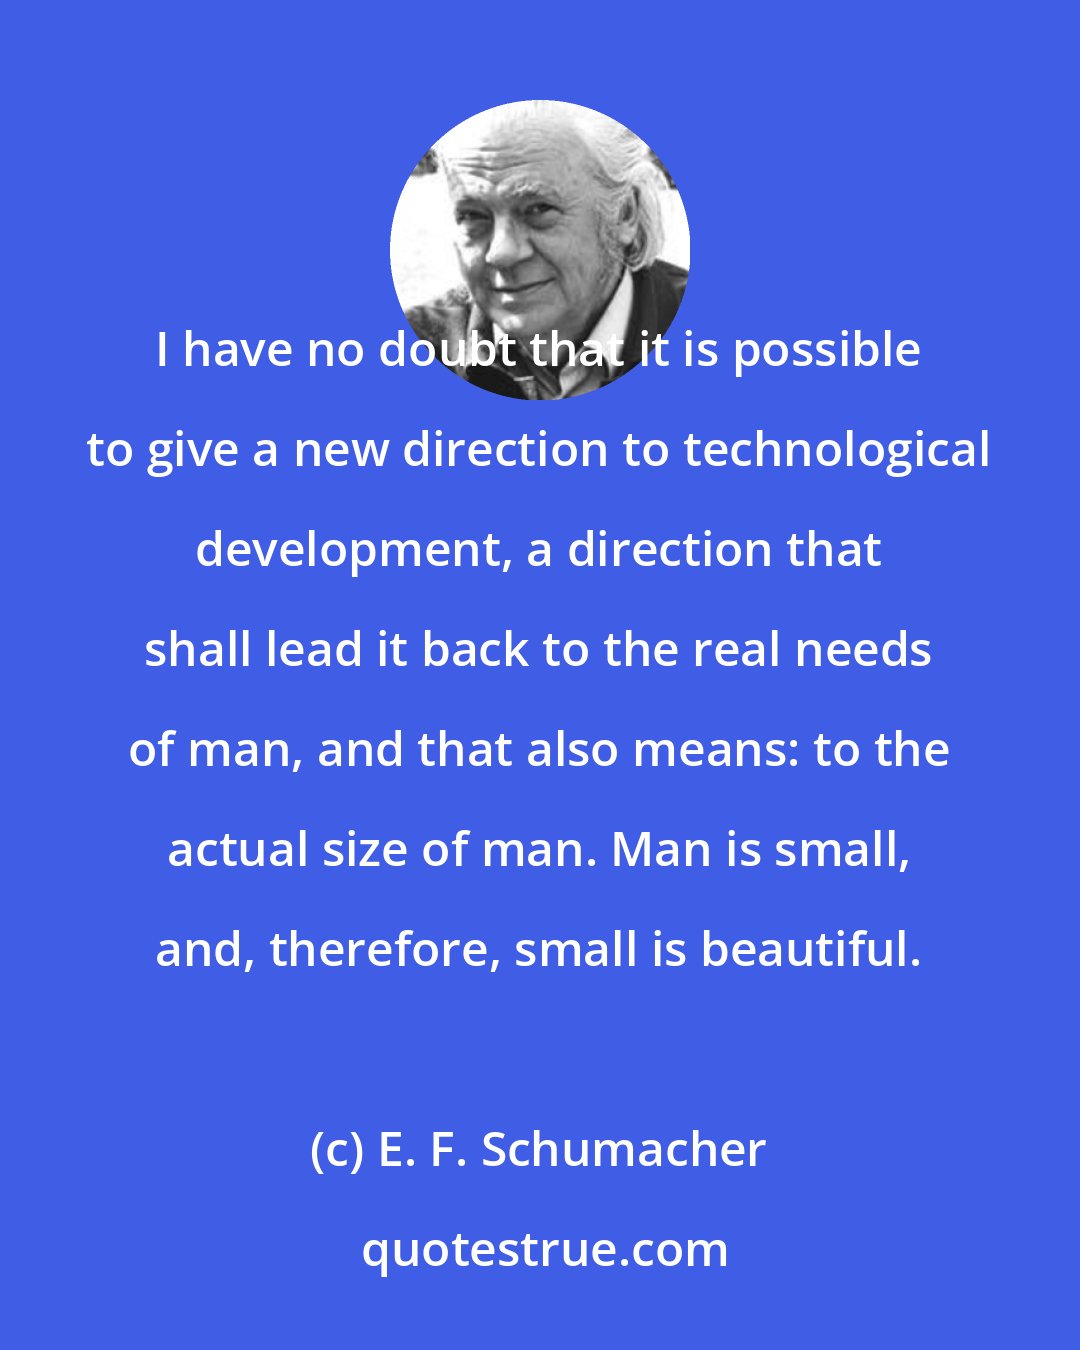 E. F. Schumacher: I have no doubt that it is possible to give a new direction to technological development, a direction that shall lead it back to the real needs of man, and that also means: to the actual size of man. Man is small, and, therefore, small is beautiful.